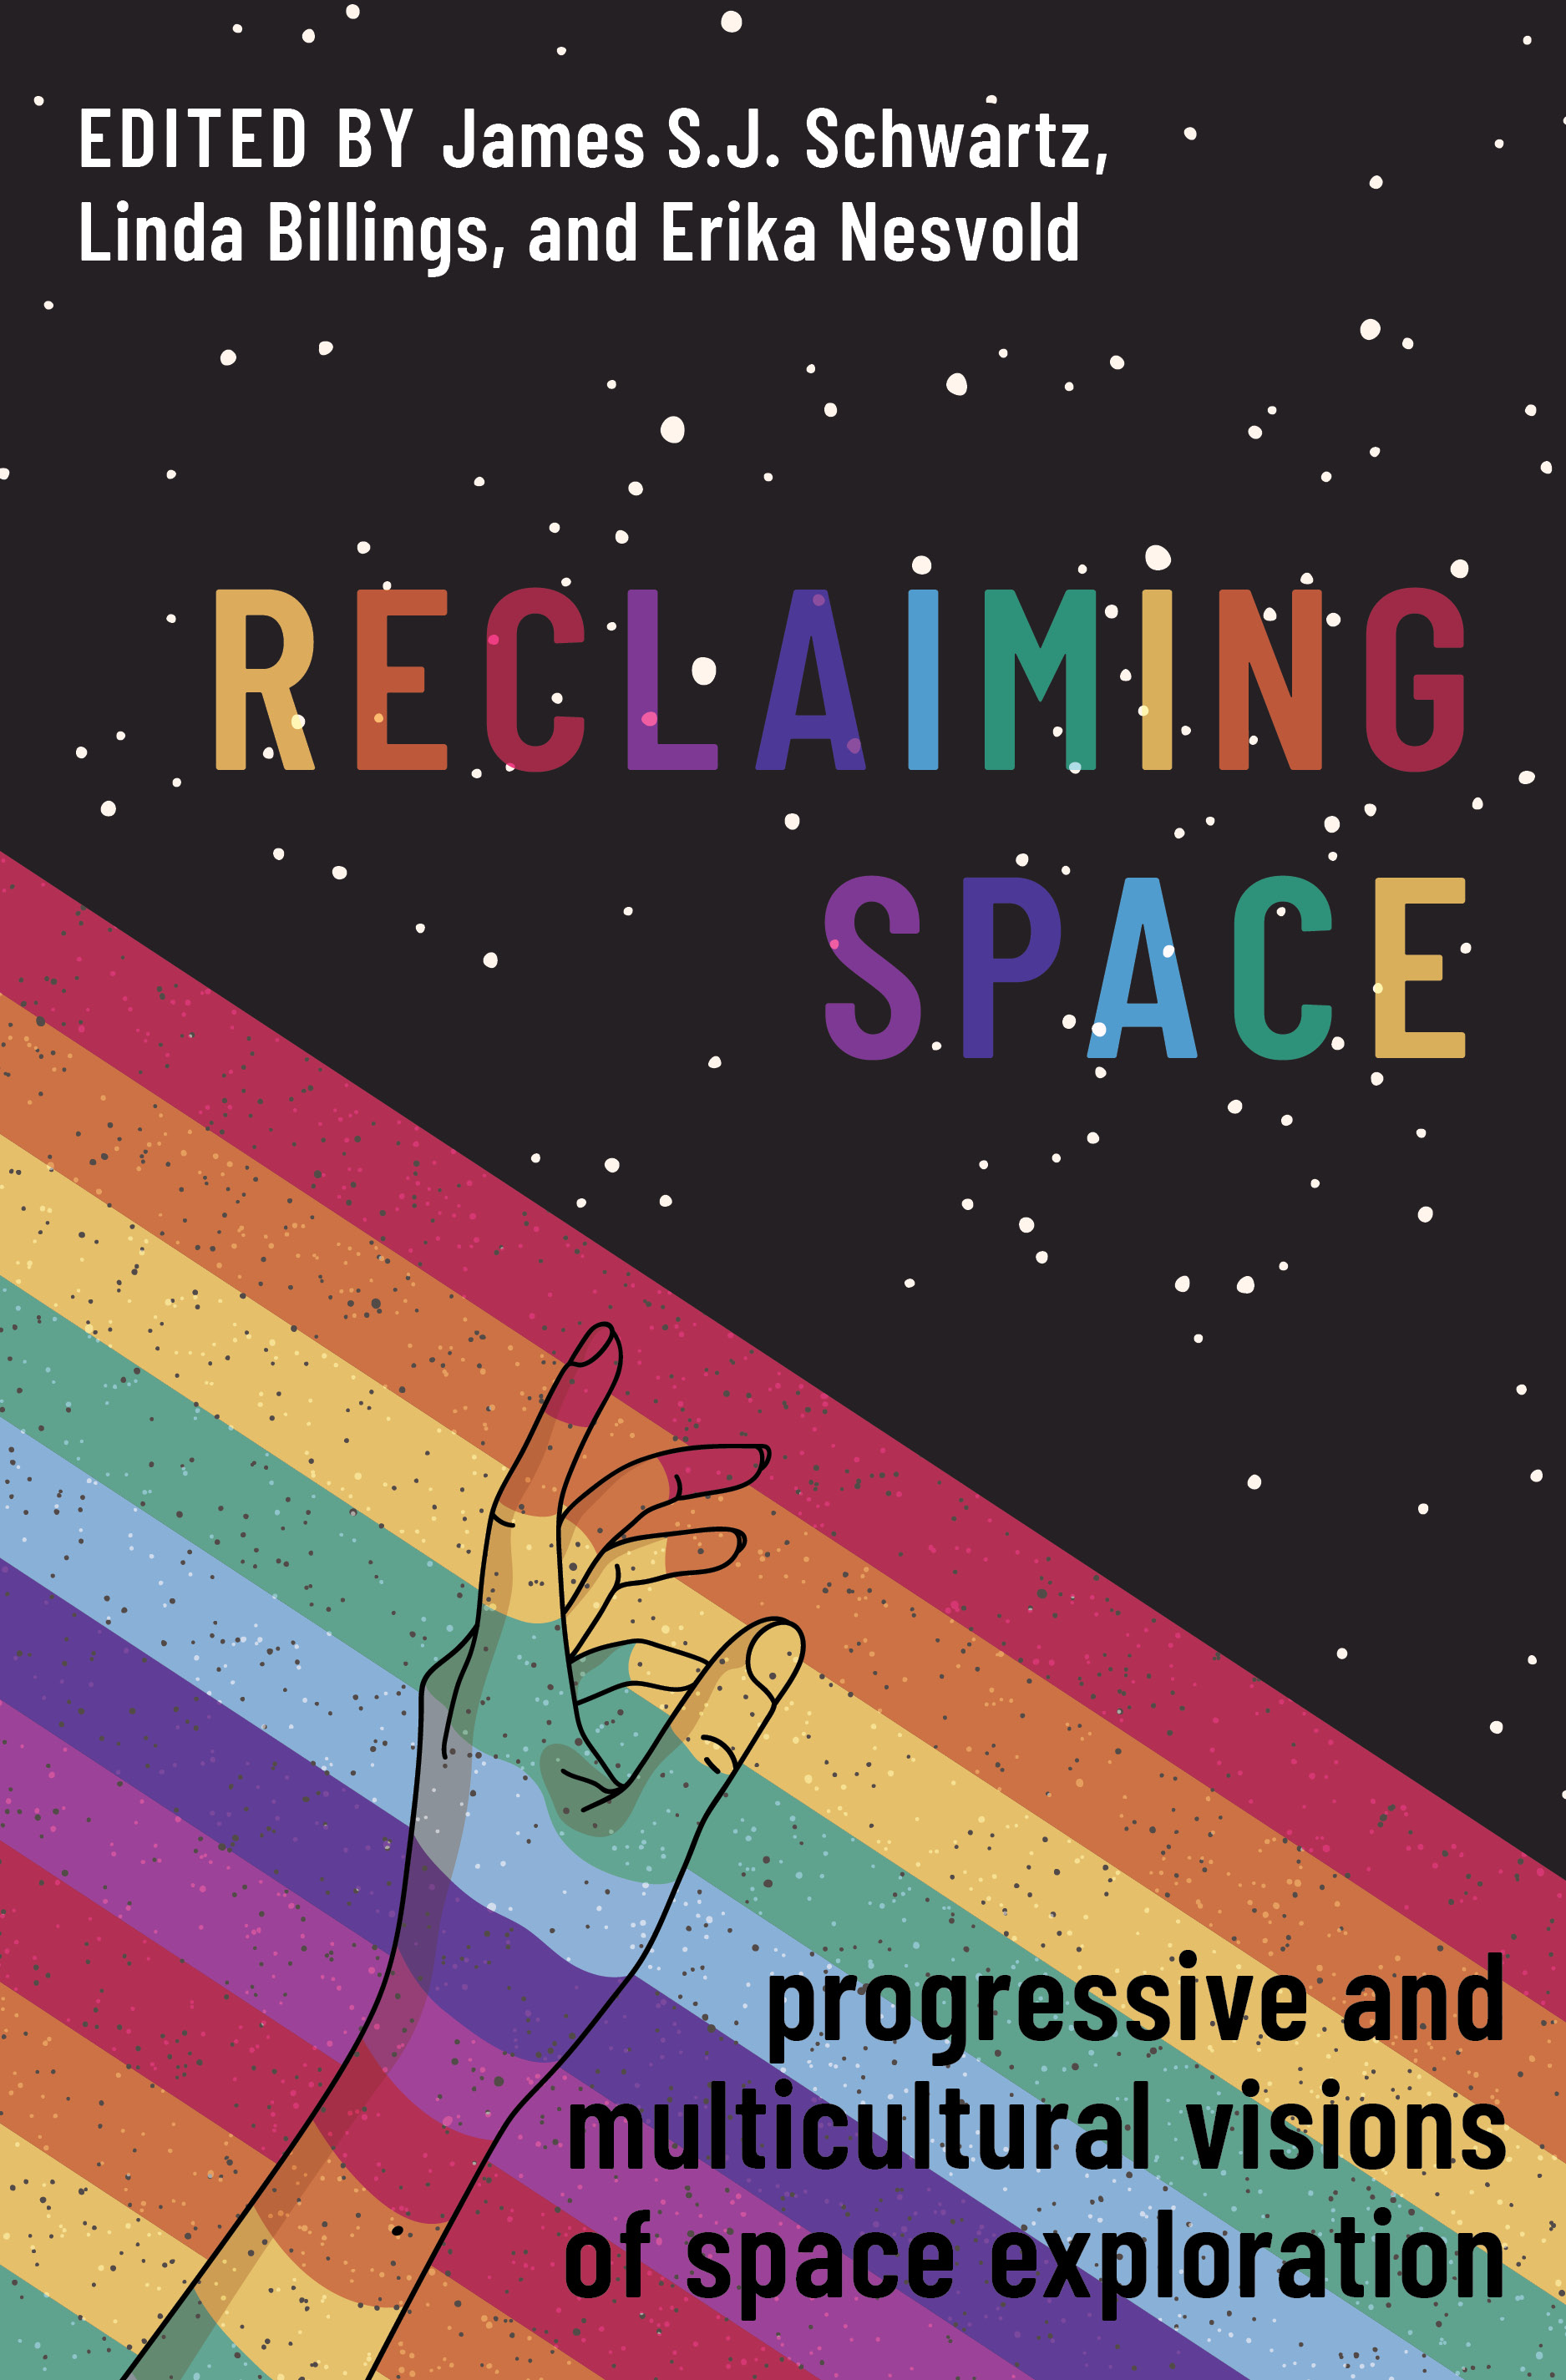 Cover art for Reclaiming Space edited by James Schwartz, Linda Billings, and Erika Nesvold